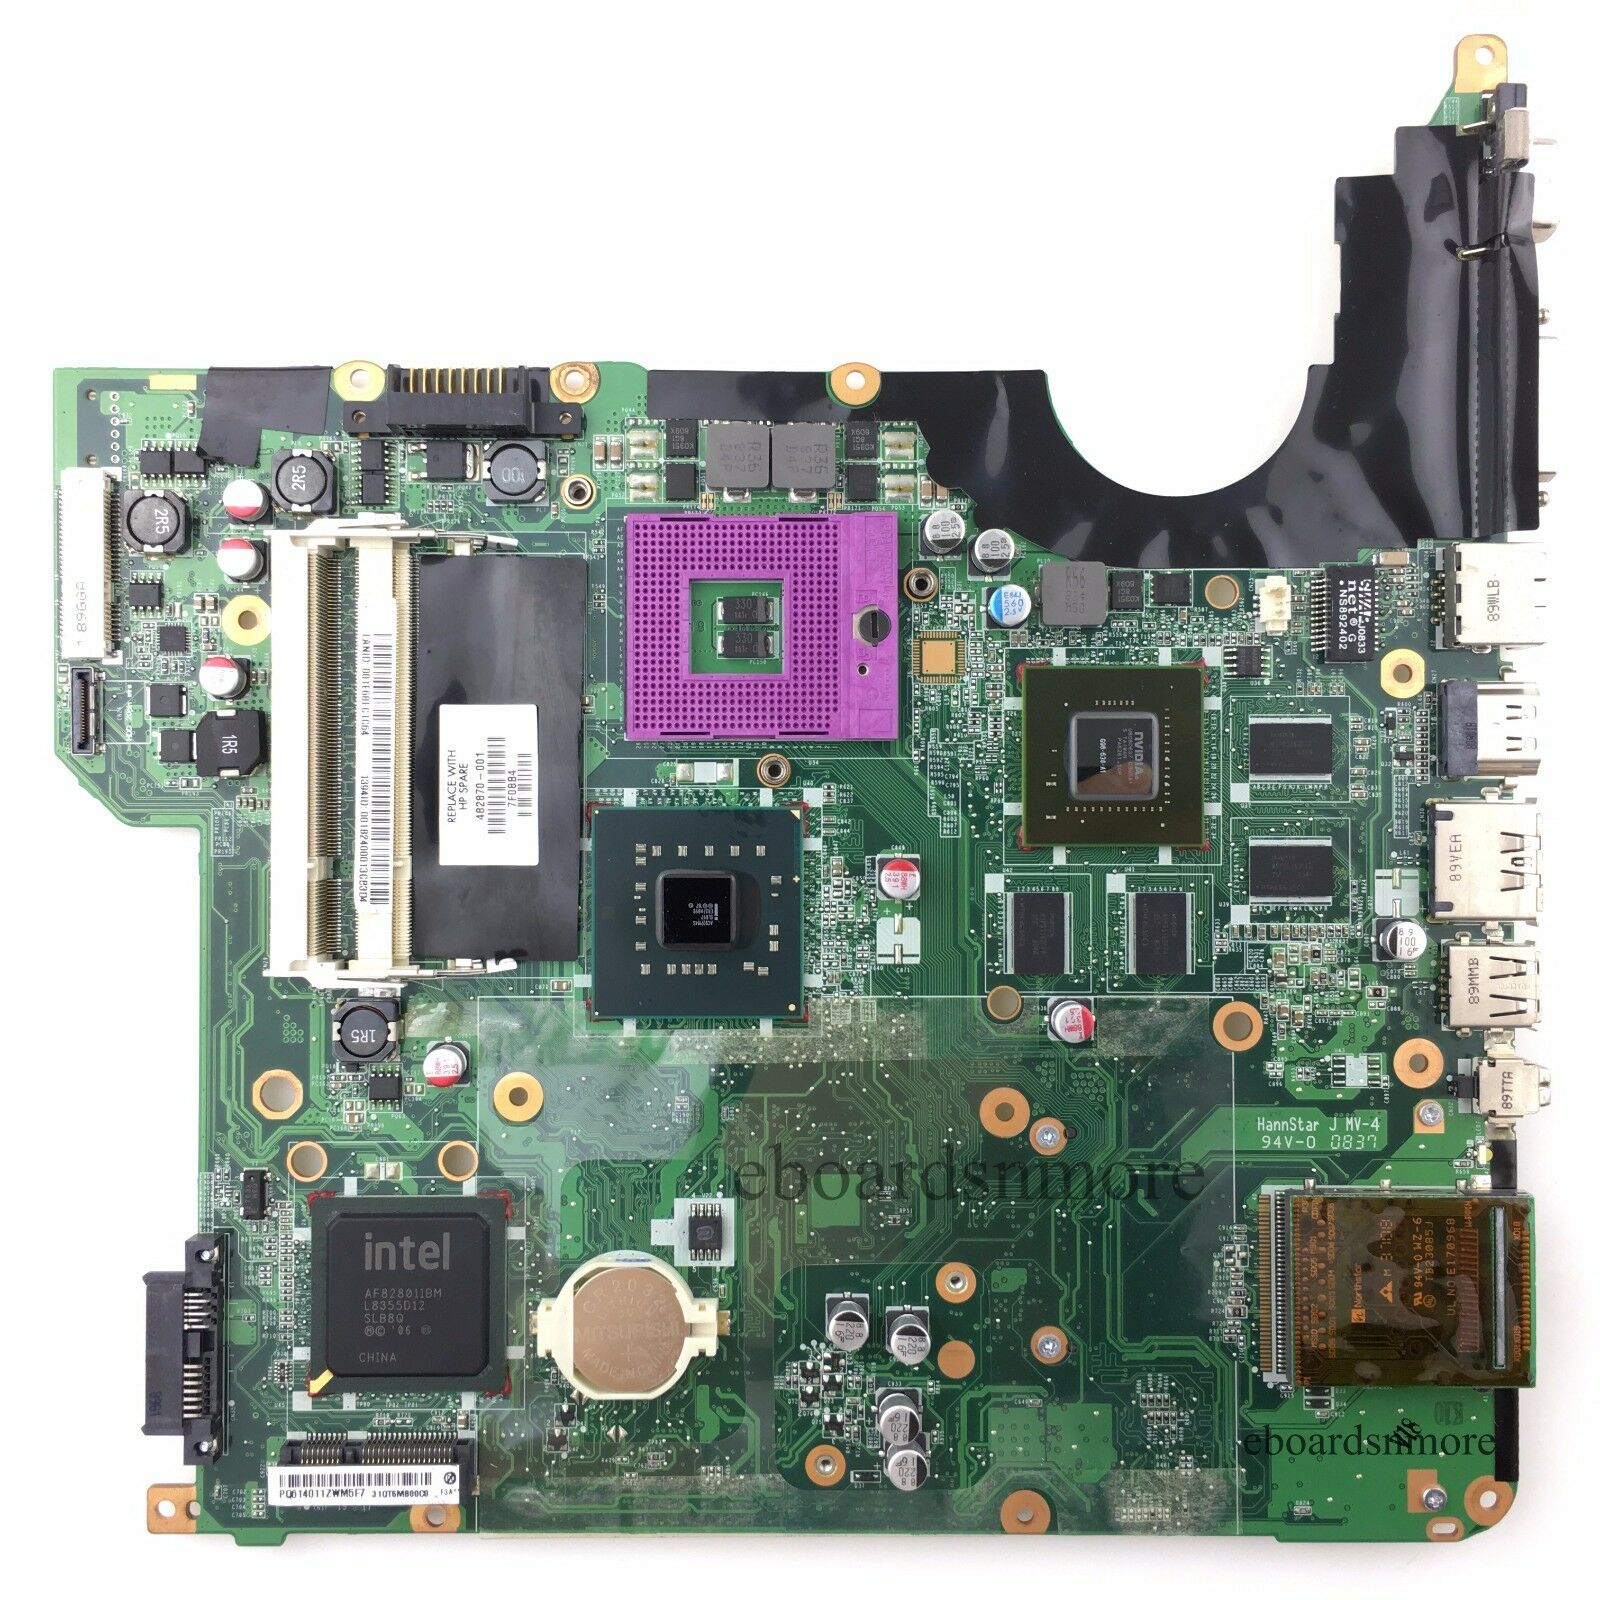 482870-001 Intel PM45 Motherboard for HP DV5-1000 Laptops, nVidia G96-630-A1, A Socket Type: Socket 478/N MP - Click Image to Close